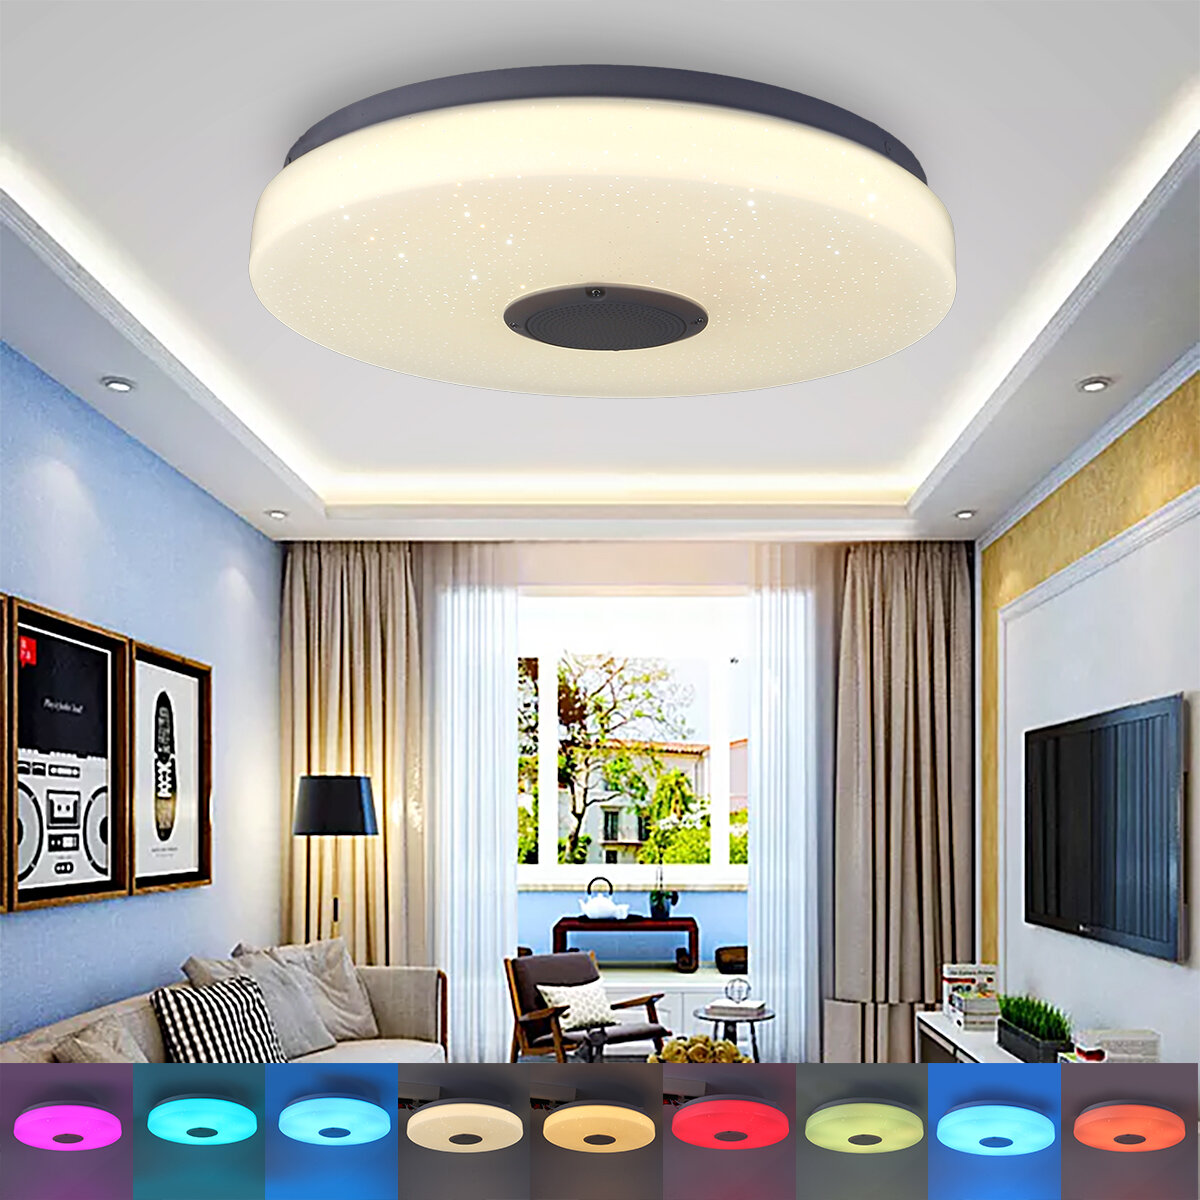 Image of 33cm LED Ceiling Lights Colorful DownLight Lamp Smart Control bluetooth WIFI APP Home